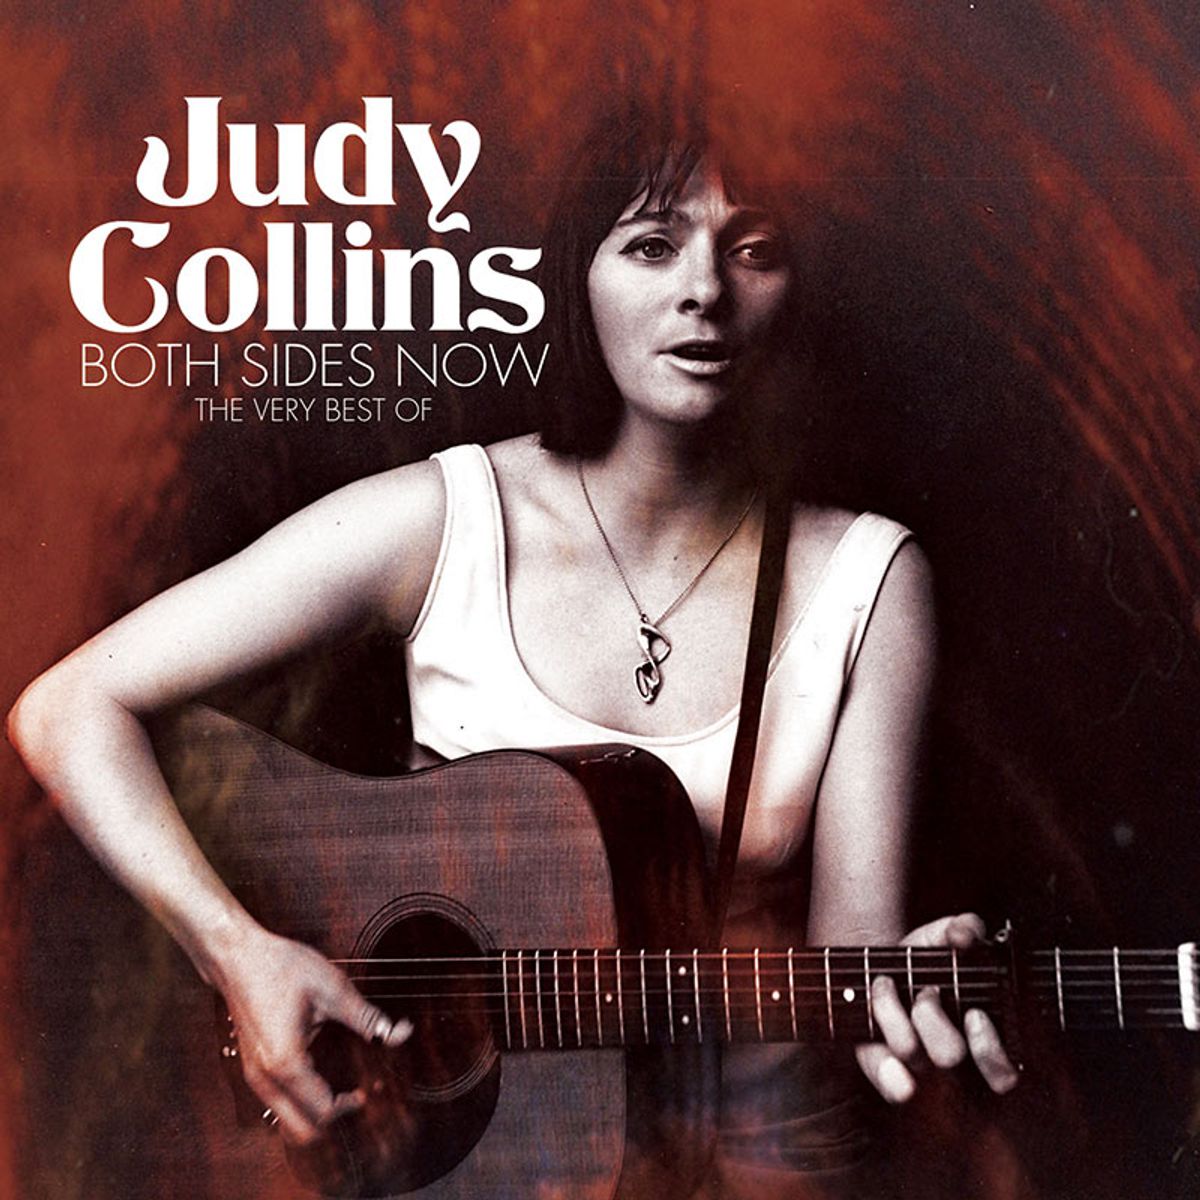 Judy Collins - 'Both Sides Now - The Very Best of Judy Collins'